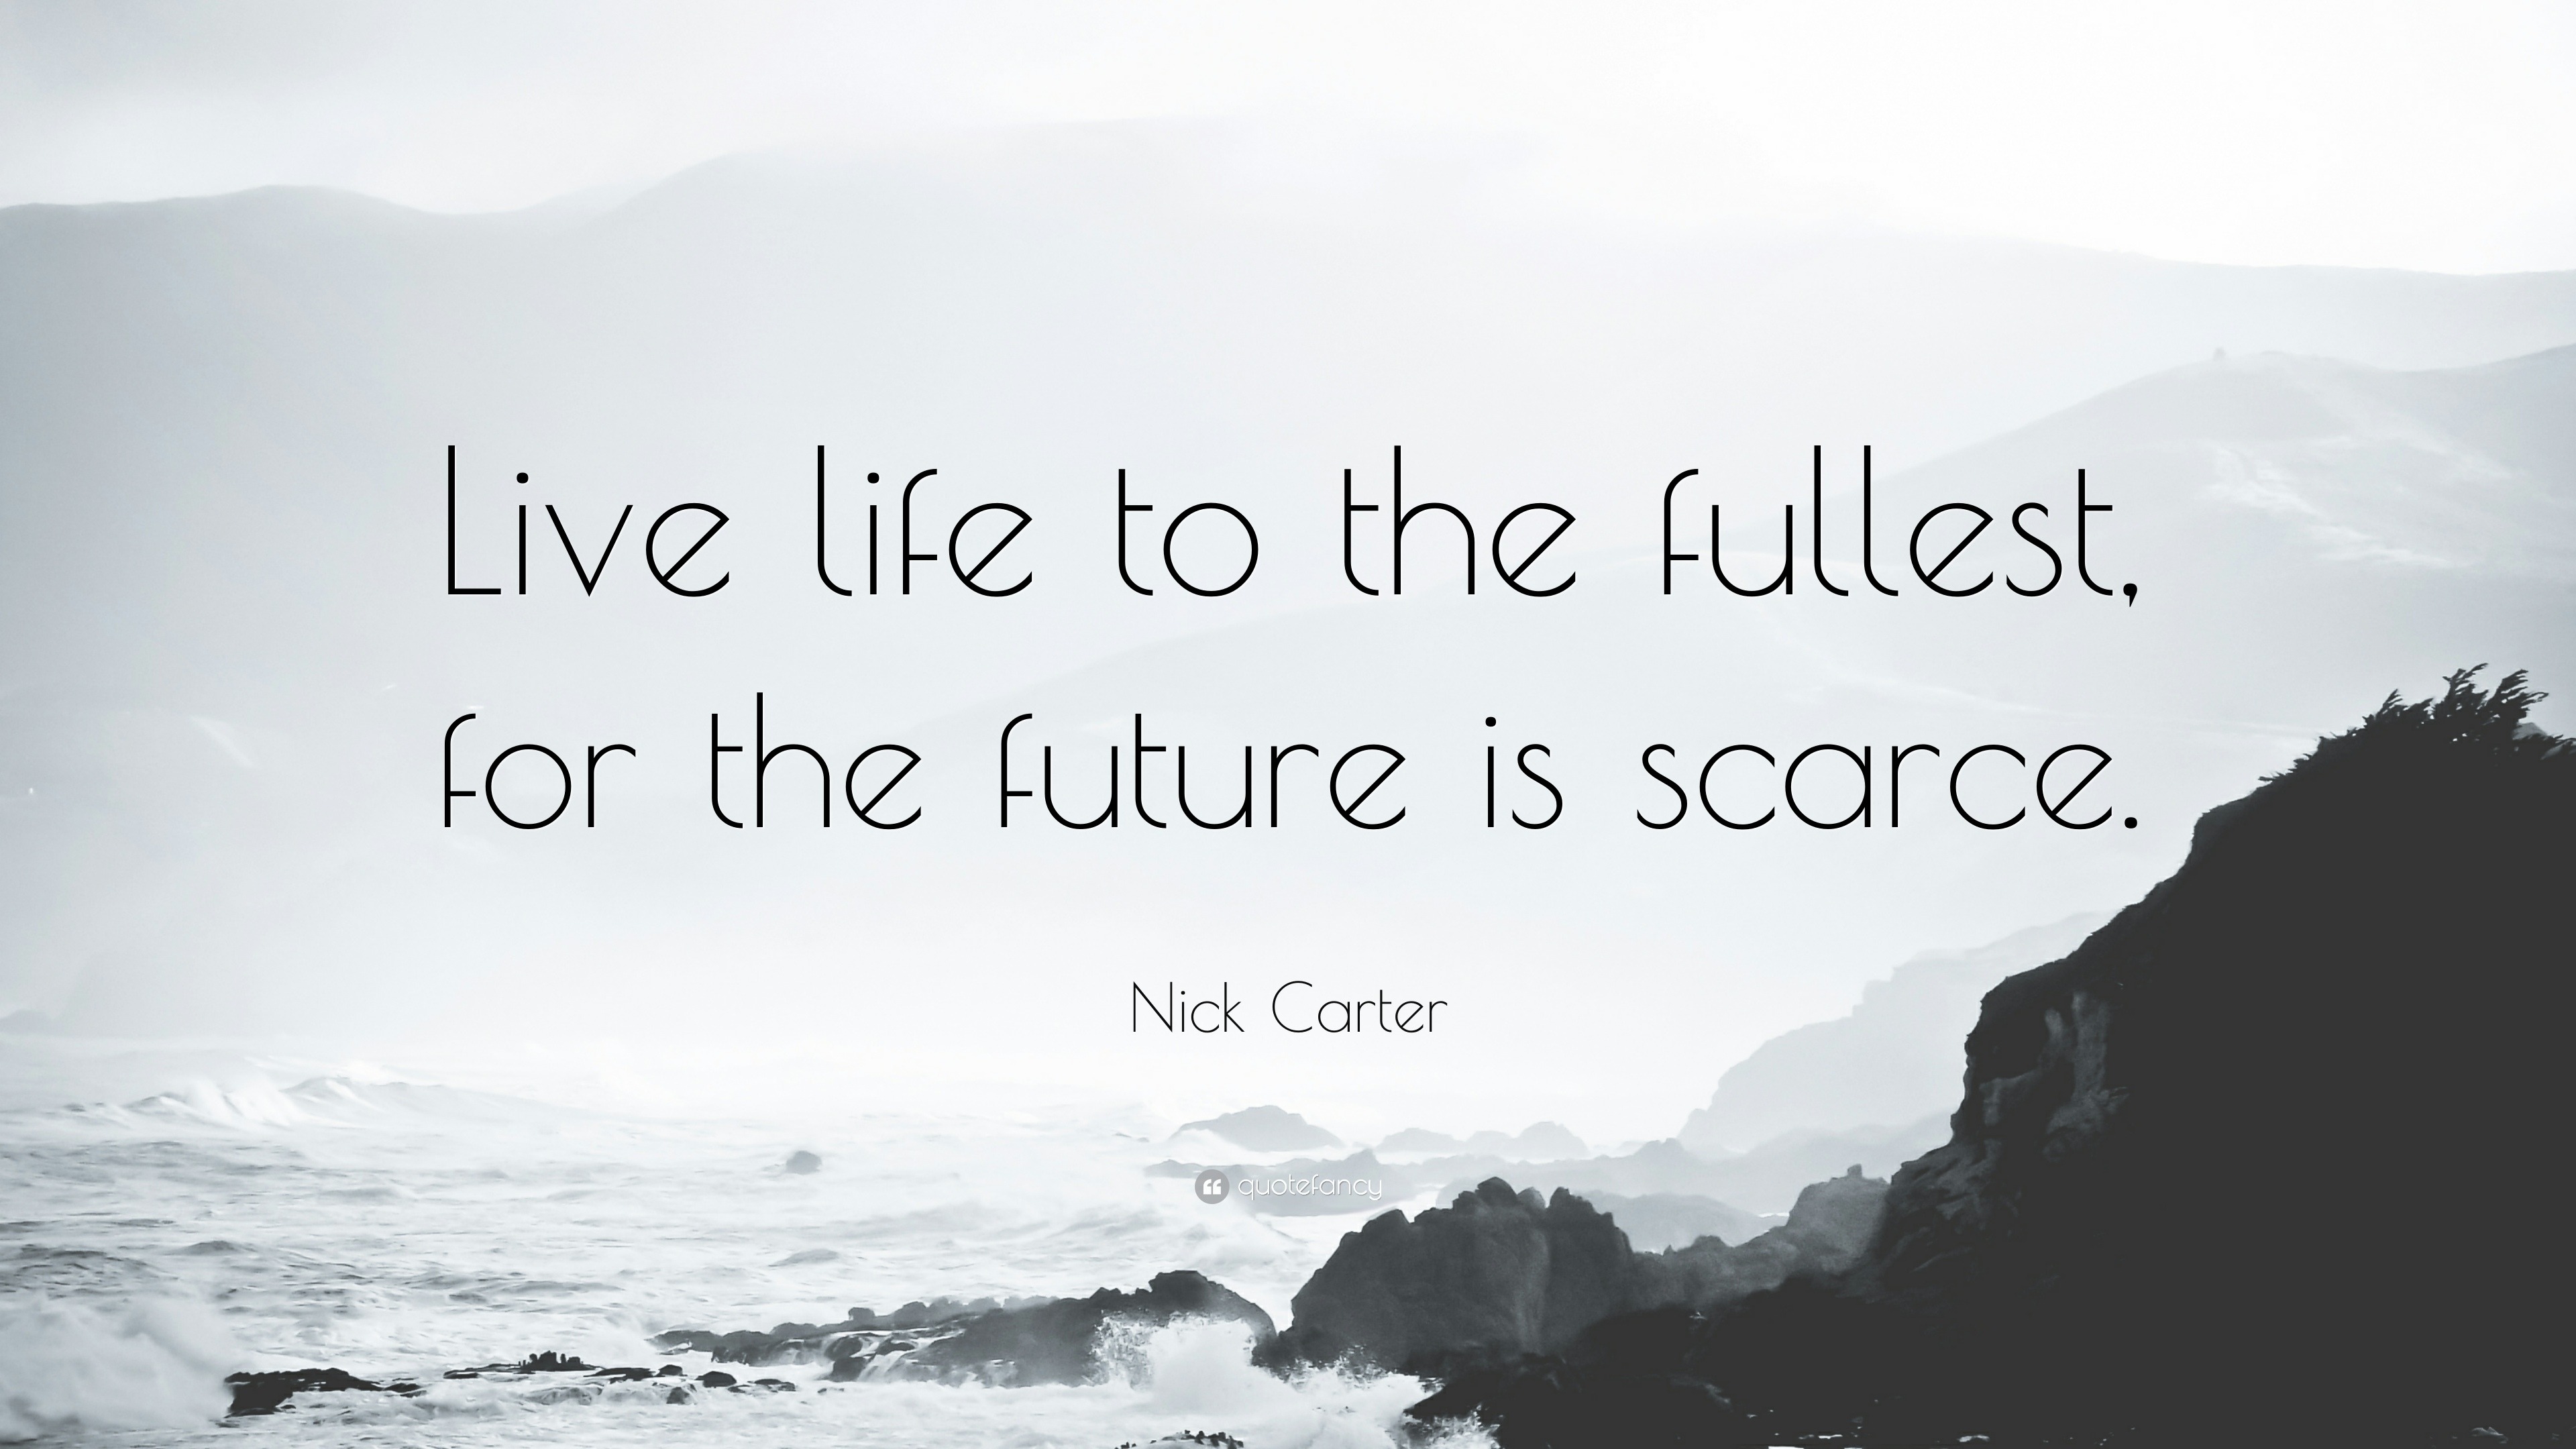 Nick Carter Quote: “Live life to the fullest, for the future is scarce.”